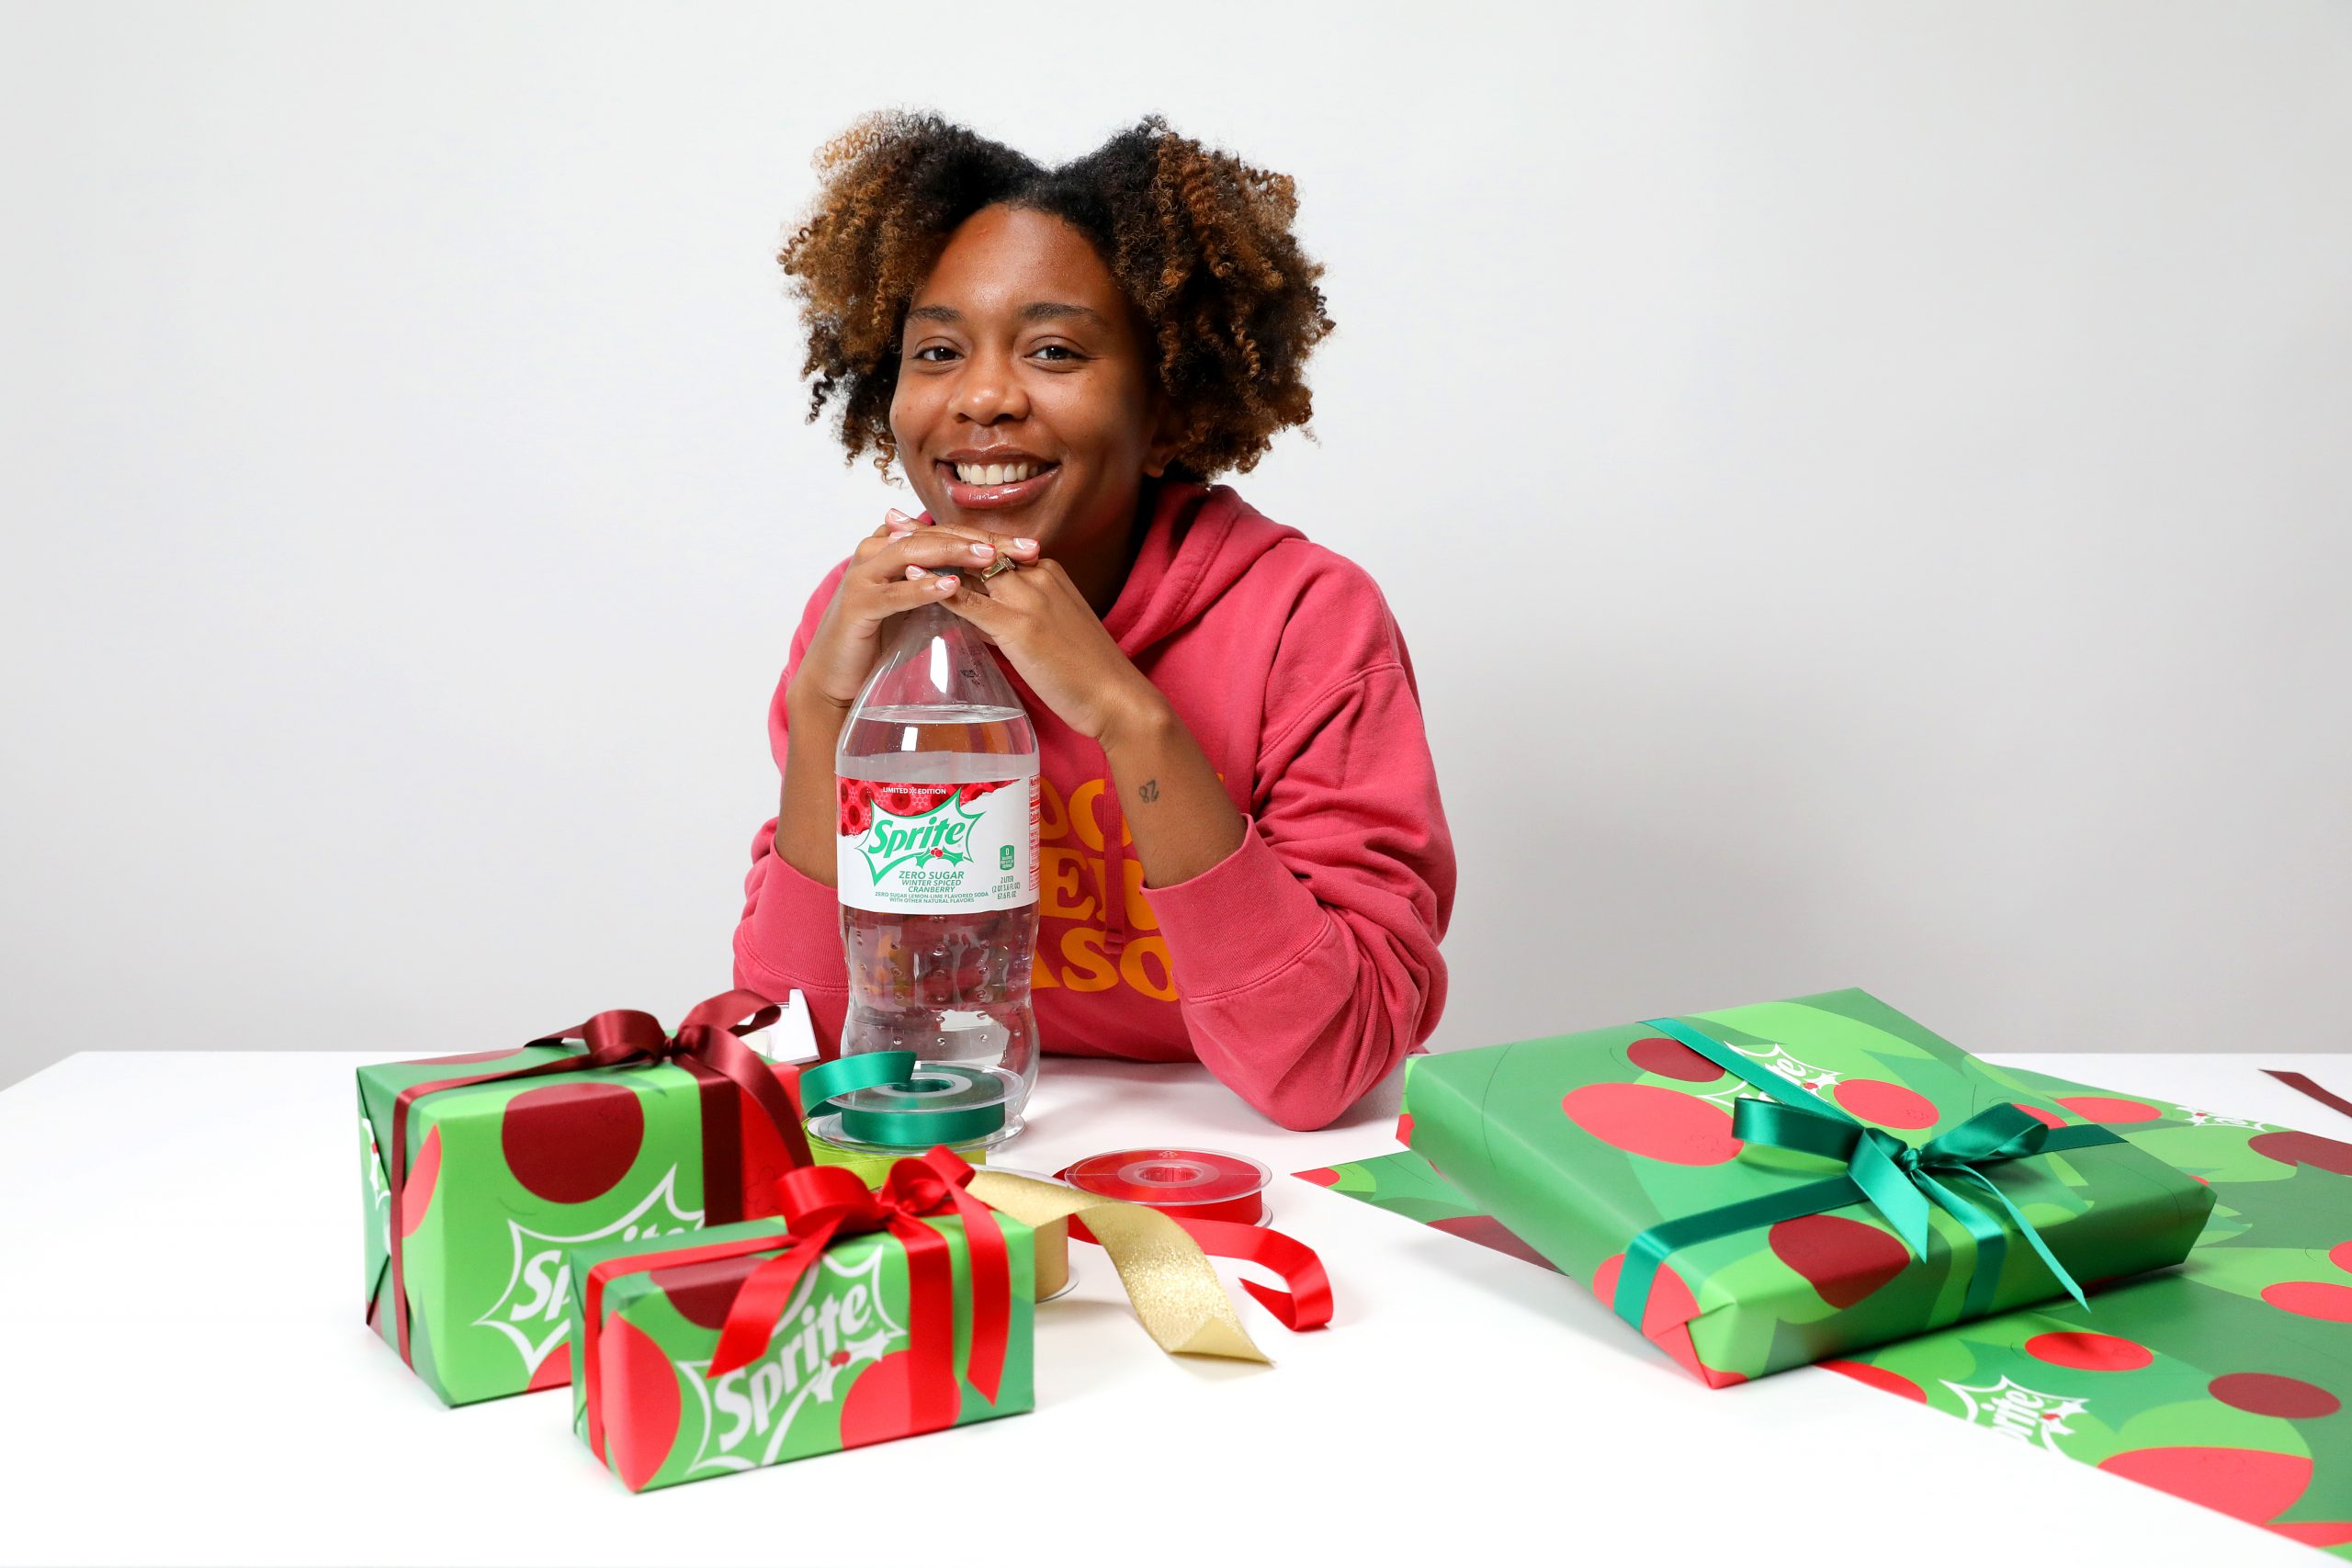 JERSEY CITY, NEW JERSEY - SEPTEMBER 28: Sprite Spreads Holiday Cheer With New LTO Flavor and Custom Gift Wrap Paper on September 28, 2021 in Jersey City, New Jersey. (Photo by Monica Schipper/Getty Images for Sprite)